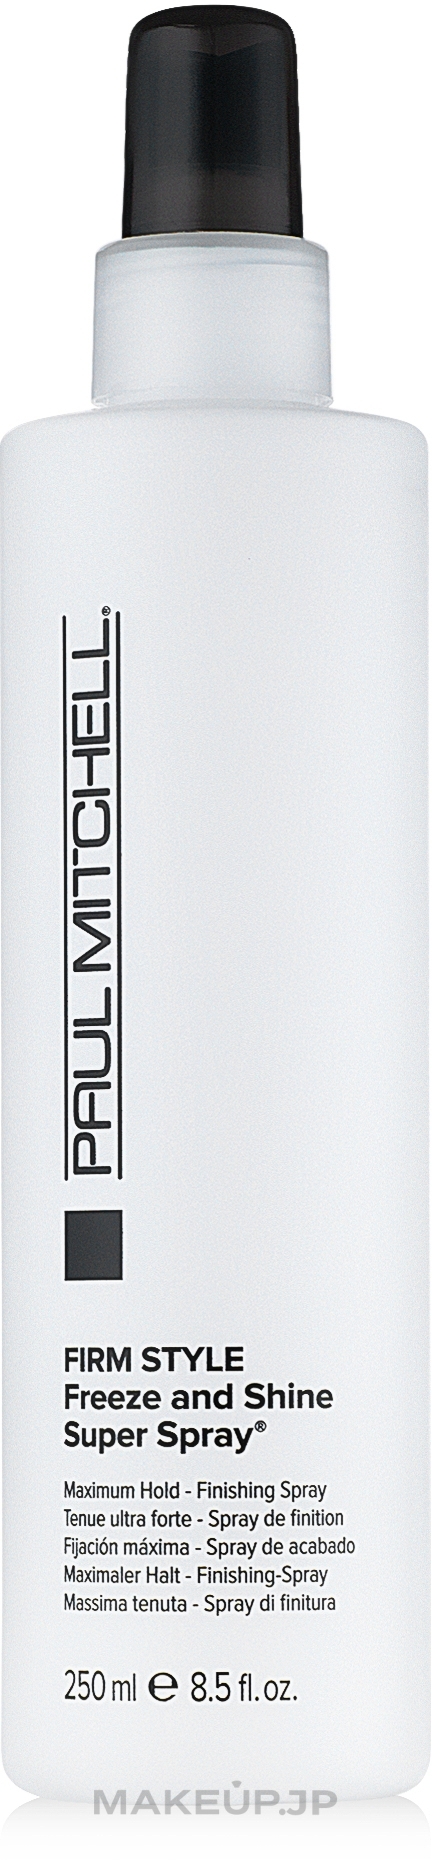 Strong Hold Styling Spray "Freeze & Shine" - Paul Mitchell Firm Style Freeze & Shine Super Spray — photo 100 ml